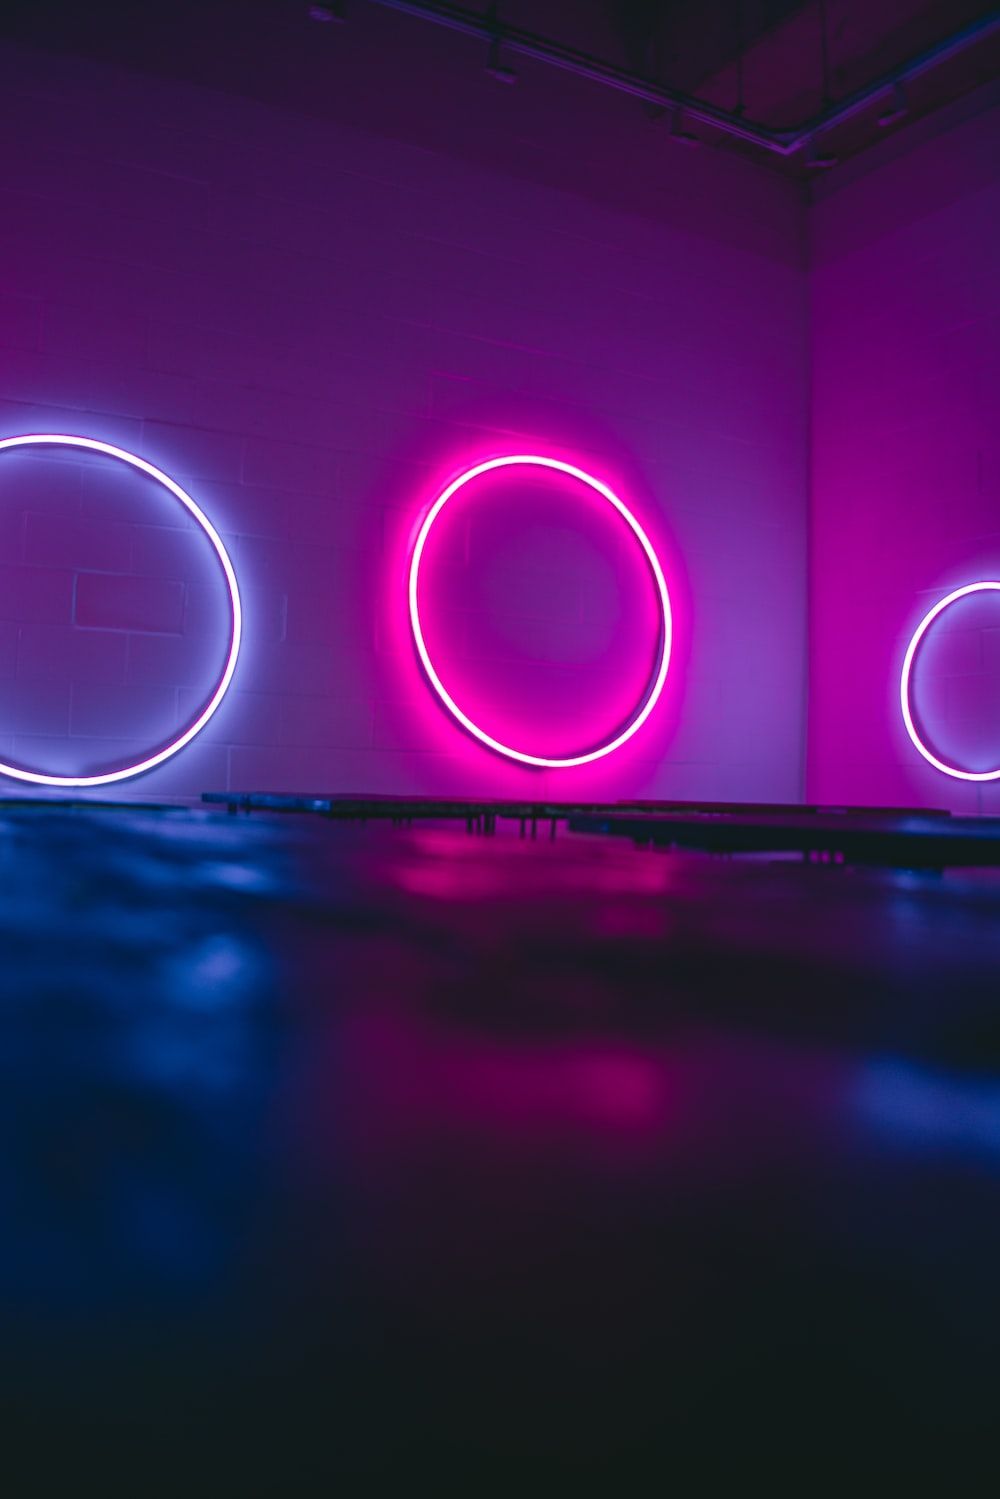 A room with three neon circles on the wall - Neon pink